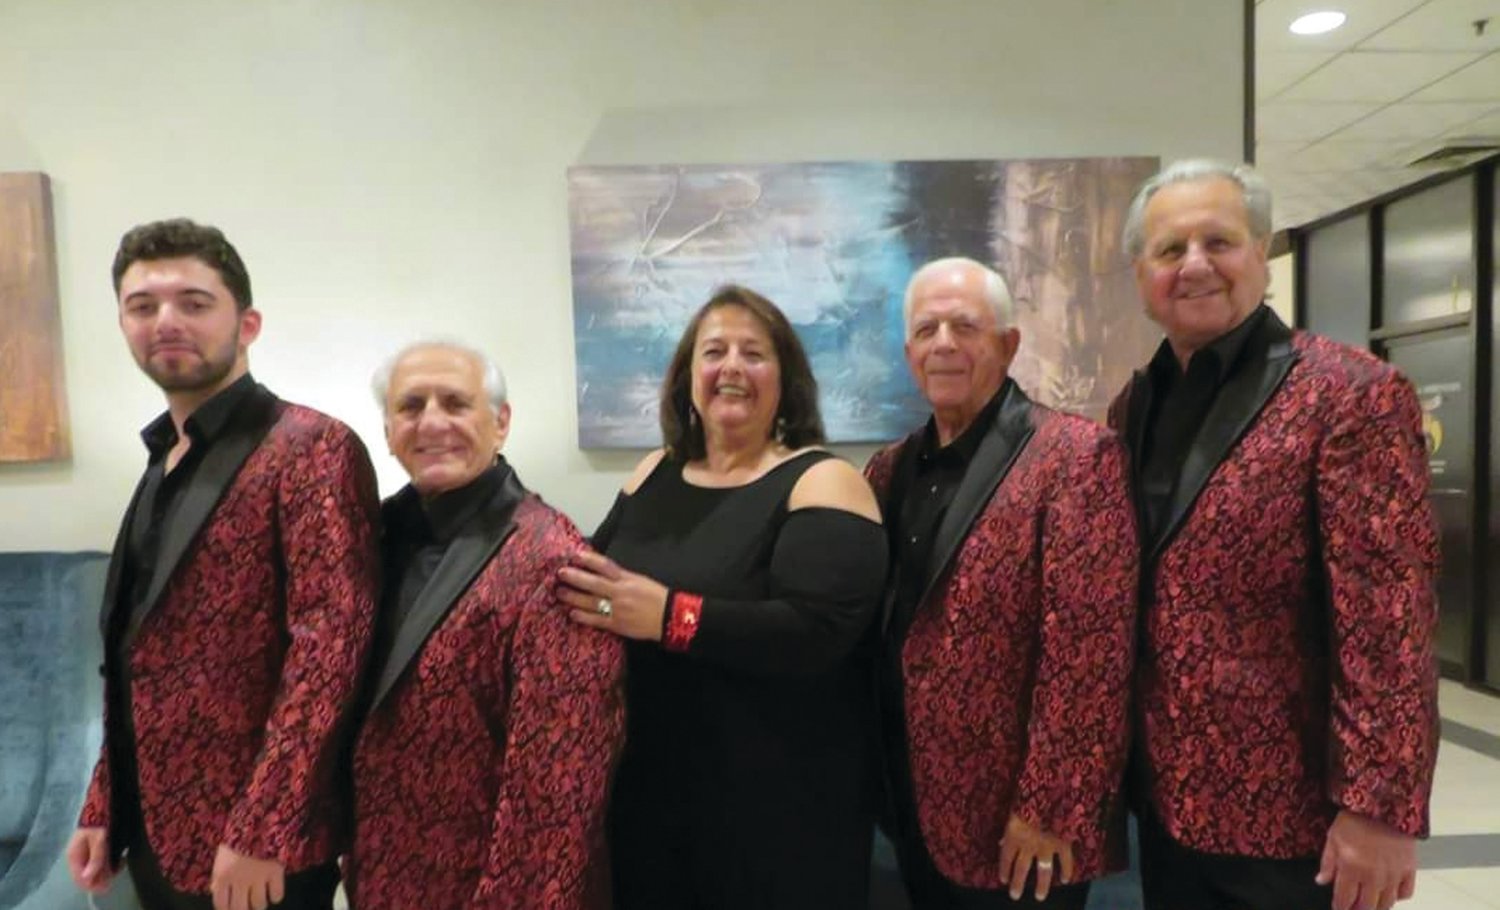 TALENTED TROUPE: Classic Blend, a premier oldies and doo wop group that is col-hosting the Dec. 13 La Vigliia with Ralph’s Catering, includes from left: Ron Giorgio, Jack Mento, Maria Russo, Ron Iacobucci and Peter Goneconte.